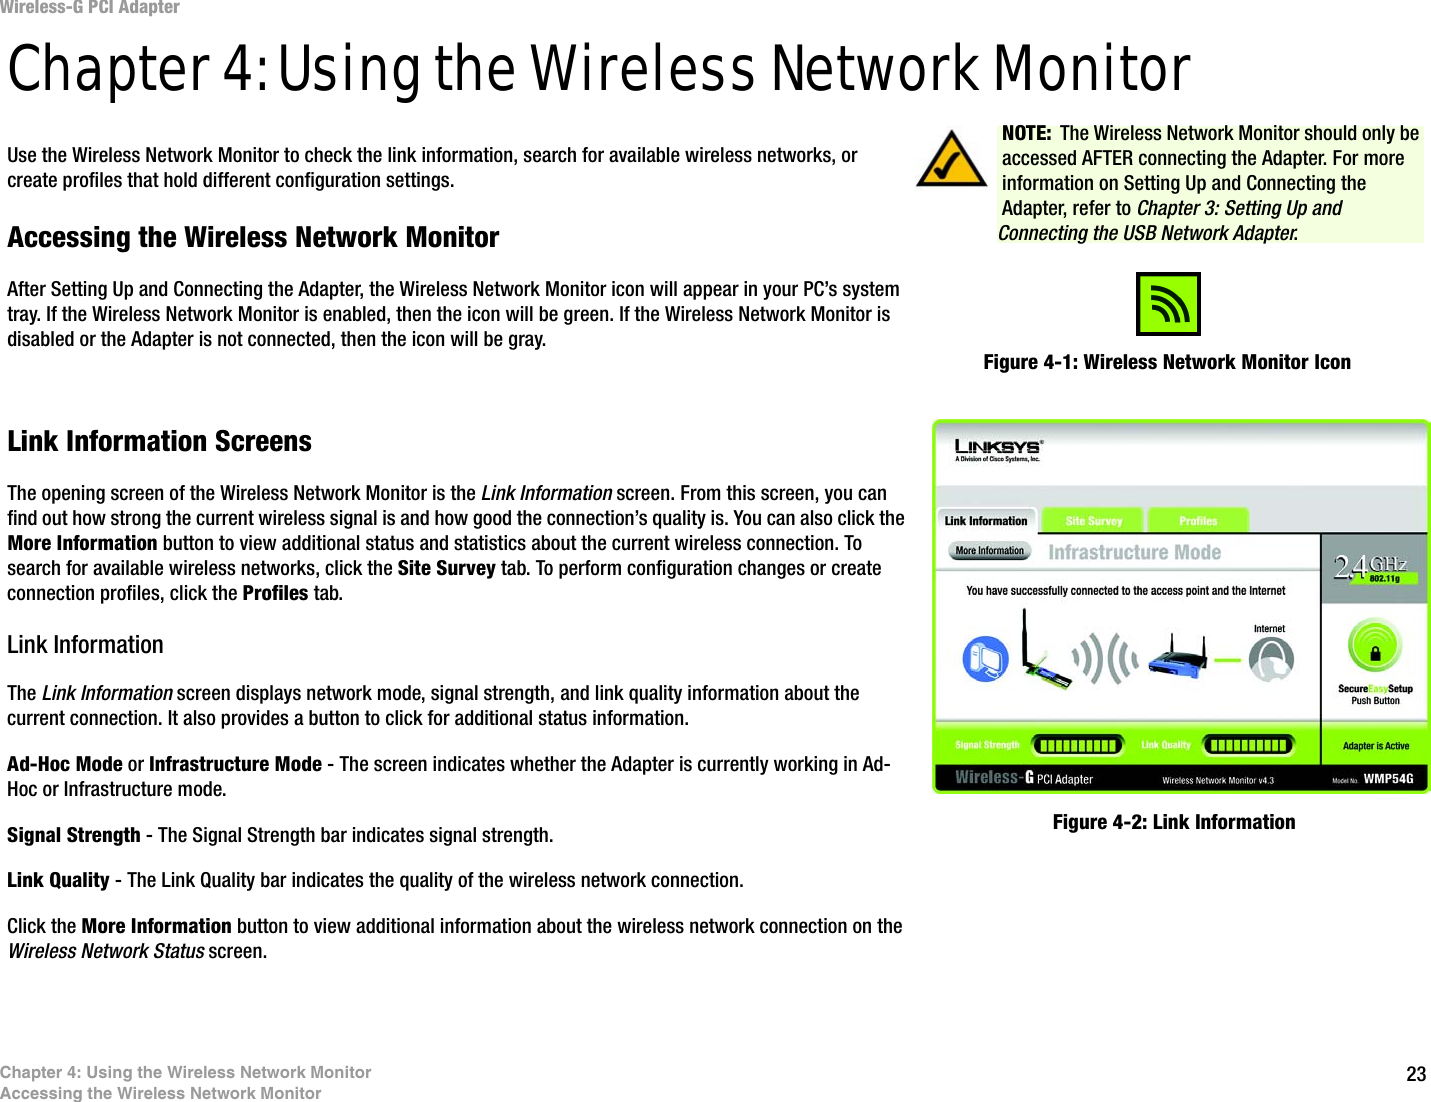 23Chapter 4: Using the Wireless Network MonitorAccessing the Wireless Network MonitorWireless-G PCI AdapterChapter 4: Using the Wireless Network MonitorUse the Wireless Network Monitor to check the link information, search for available wireless networks, or create profiles that hold different configuration settings.Accessing the Wireless Network MonitorAfter Setting Up and Connecting the Adapter, the Wireless Network Monitor icon will appear in your PC’s system tray. If the Wireless Network Monitor is enabled, then the icon will be green. If the Wireless Network Monitor is disabled or the Adapter is not connected, then the icon will be gray.Link Information ScreensThe opening screen of the Wireless Network Monitor is the Link Information screen. From this screen, you can find out how strong the current wireless signal is and how good the connection’s quality is. You can also click the More Information button to view additional status and statistics about the current wireless connection. To search for available wireless networks, click the Site Survey tab. To perform configuration changes or create connection profiles, click the Profiles tab.Link InformationThe Link Information screen displays network mode, signal strength, and link quality information about the current connection. It also provides a button to click for additional status information.Ad-Hoc Mode or Infrastructure Mode - The screen indicates whether the Adapter is currently working in Ad-Hoc or Infrastructure mode.Signal Strength - The Signal Strength bar indicates signal strength. Link Quality - The Link Quality bar indicates the quality of the wireless network connection.Click the More Information button to view additional information about the wireless network connection on the Wireless Network Status screen.Figure 4-1: Wireless Network Monitor IconFigure 4-2: Link InformationNOTE: The Wireless Network Monitor should only be accessed AFTER connecting the Adapter. For more information on Setting Up and Connecting the Adapter, refer to Chapter 3: Setting Up and Connecting the USB Network Adapter.